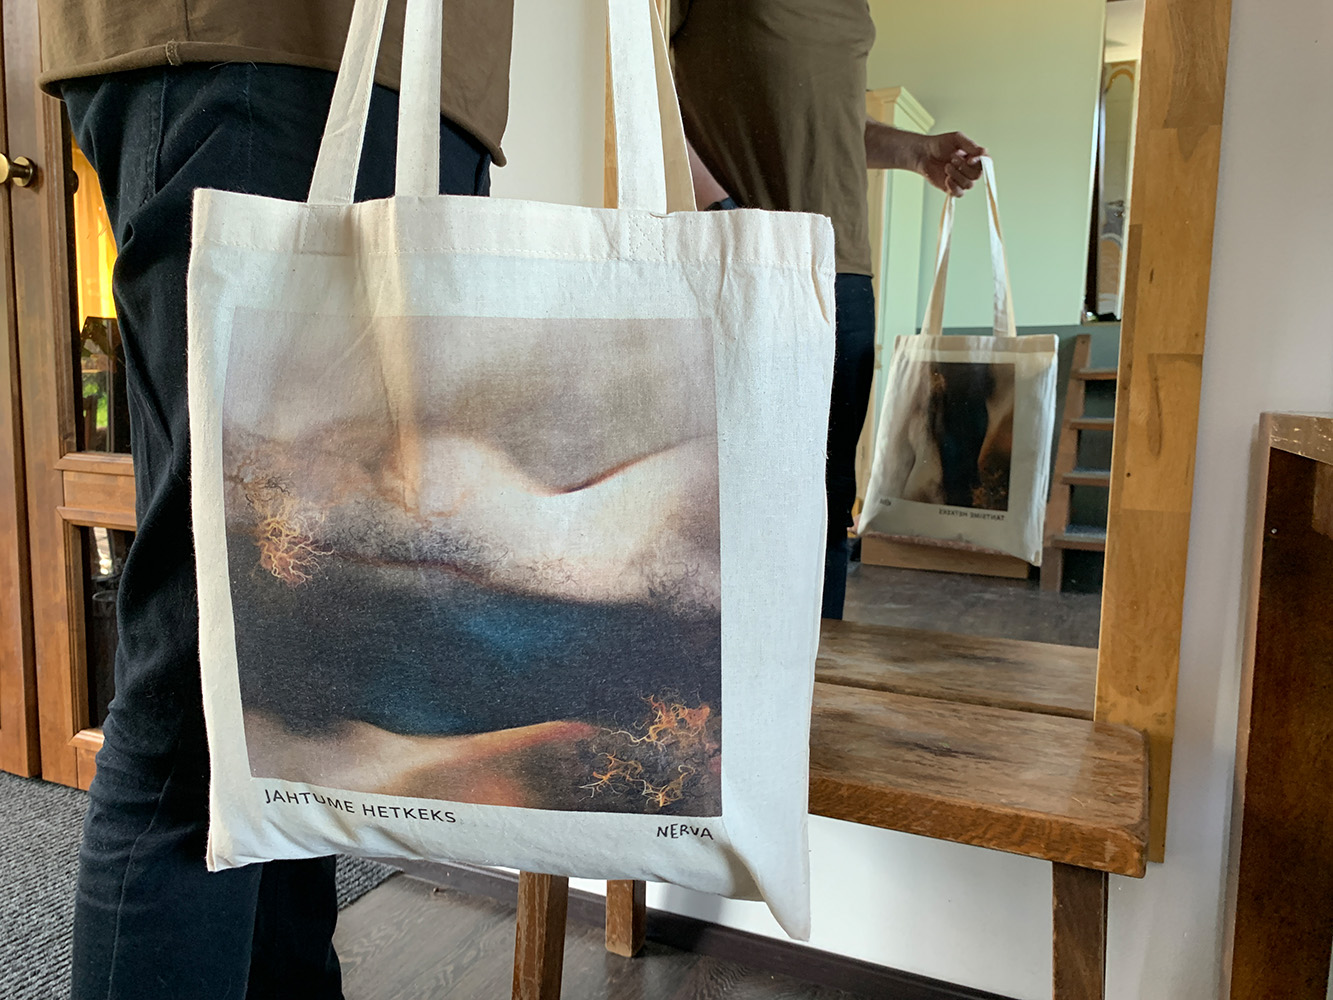 Experience the art of Nerva firsthand with this unique photo of the artist holding the 100% cotton campaign bag. This image captures a clever view in which both sides of the bag are visible, with 'Jahtume hetkeks' facing forward and 'Tantsime hetkeks' reflected in a mirror. The natural lighting and setting emphasize the bag’s quality and the vibrant, lasting print of the artwork.